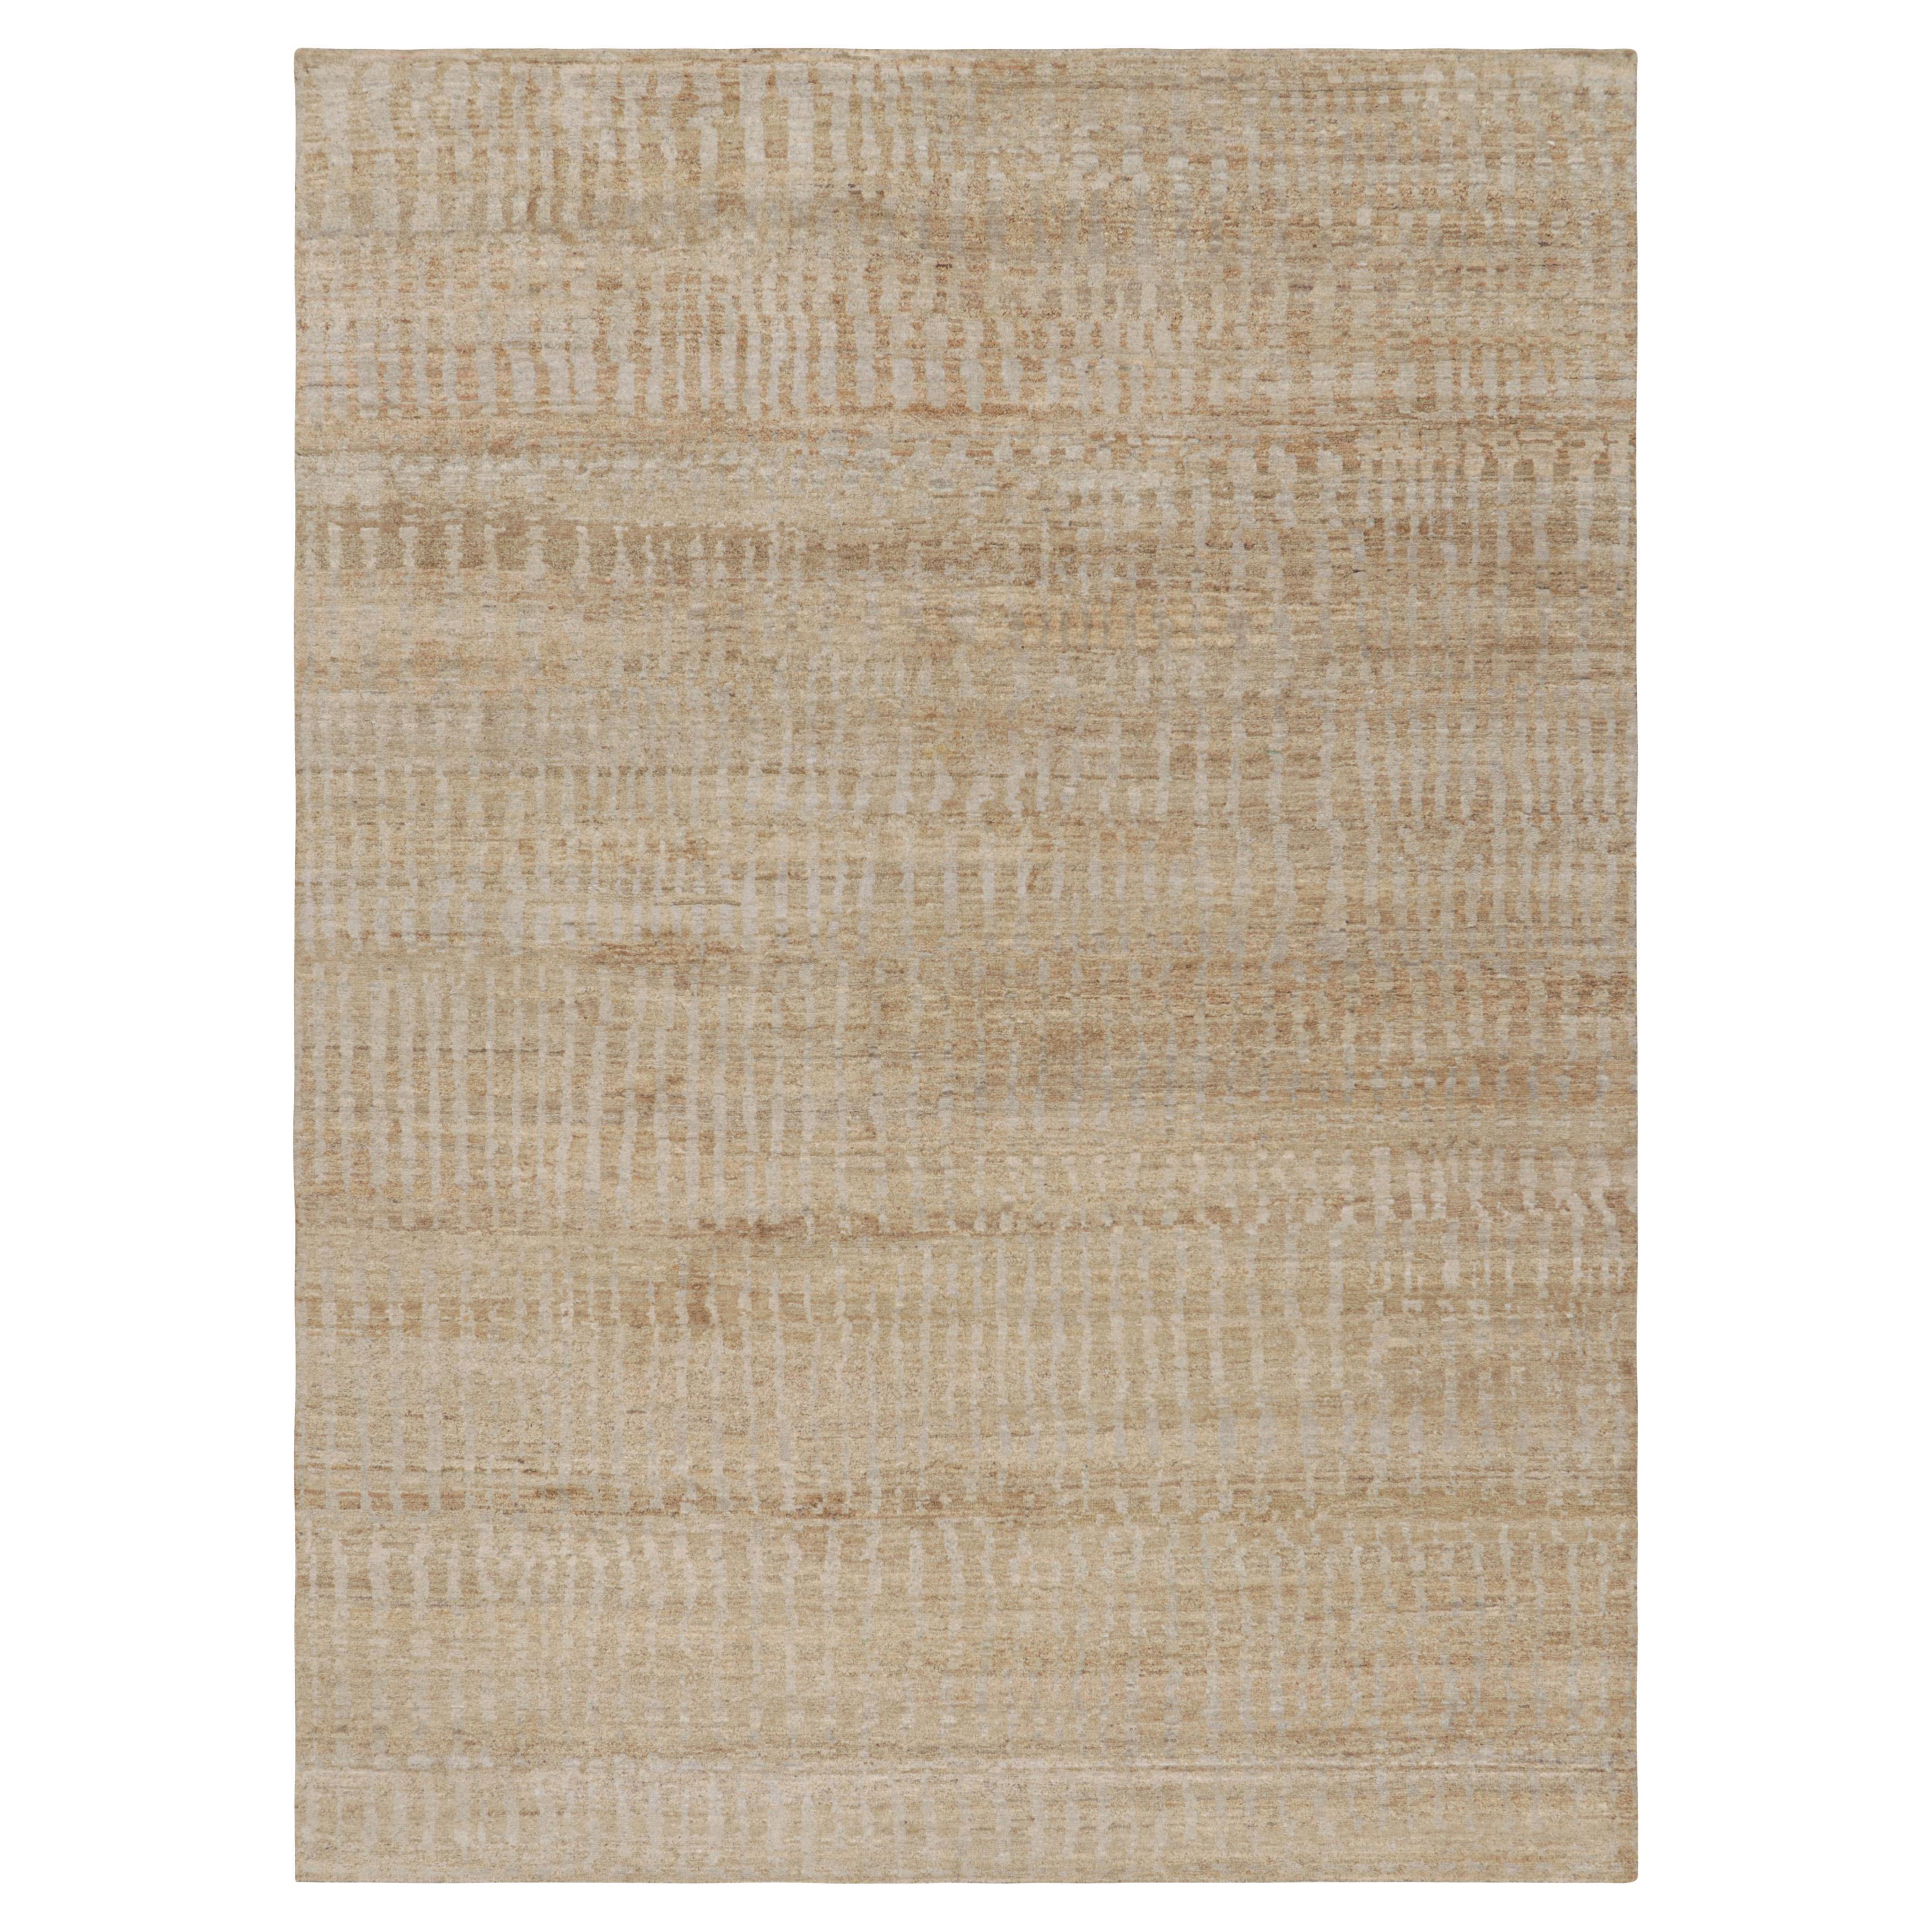 Rug & Kilim’s Contemporary Textural Rug in Beige-Brown and Gray Tones For Sale